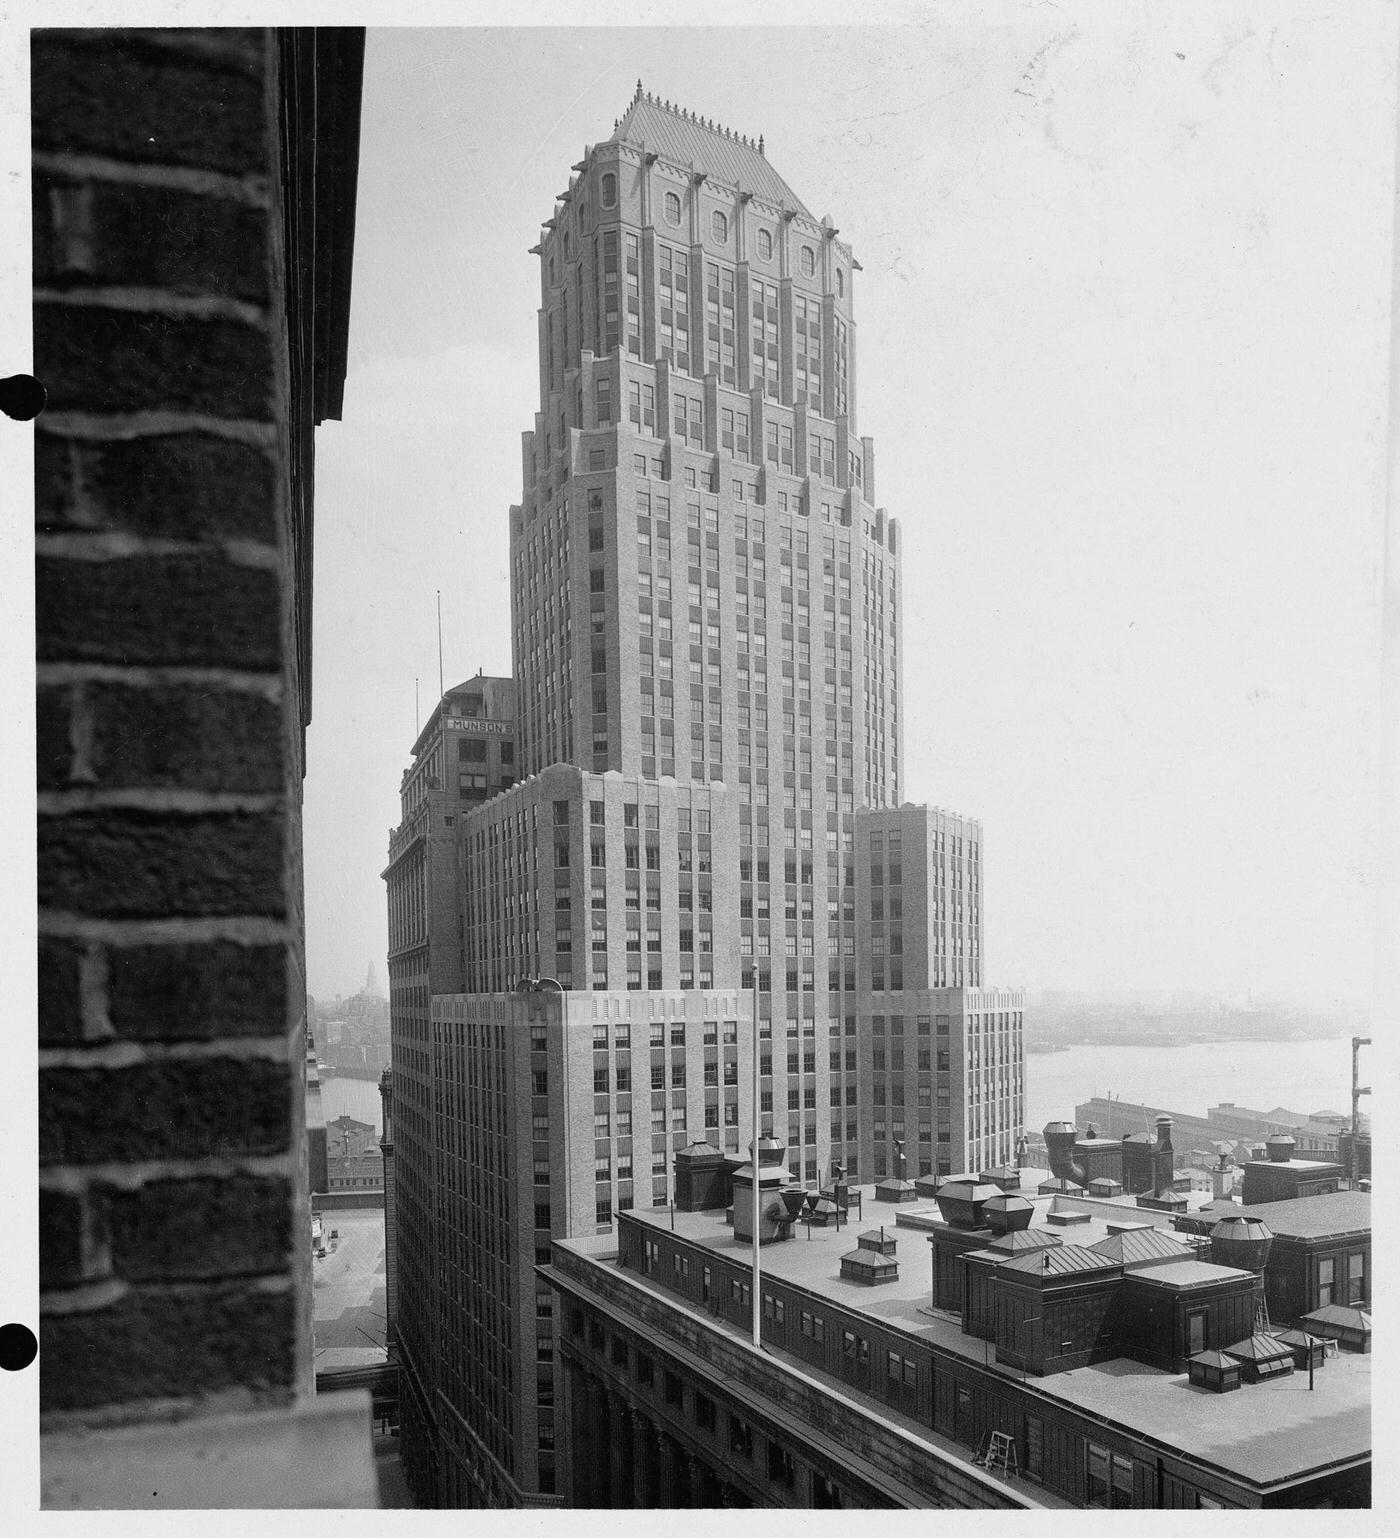 Building At 59 Wall Street Equipped With General Electric Elevator Equipment, Manhattan.